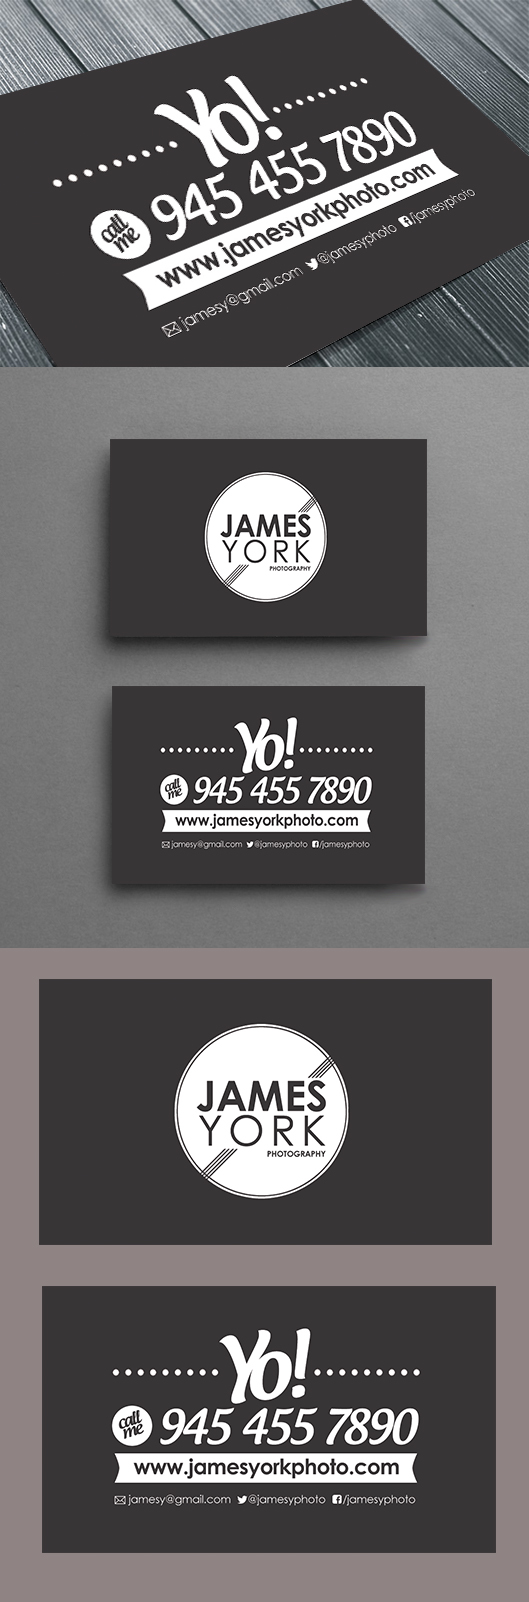 geeky business cards 2